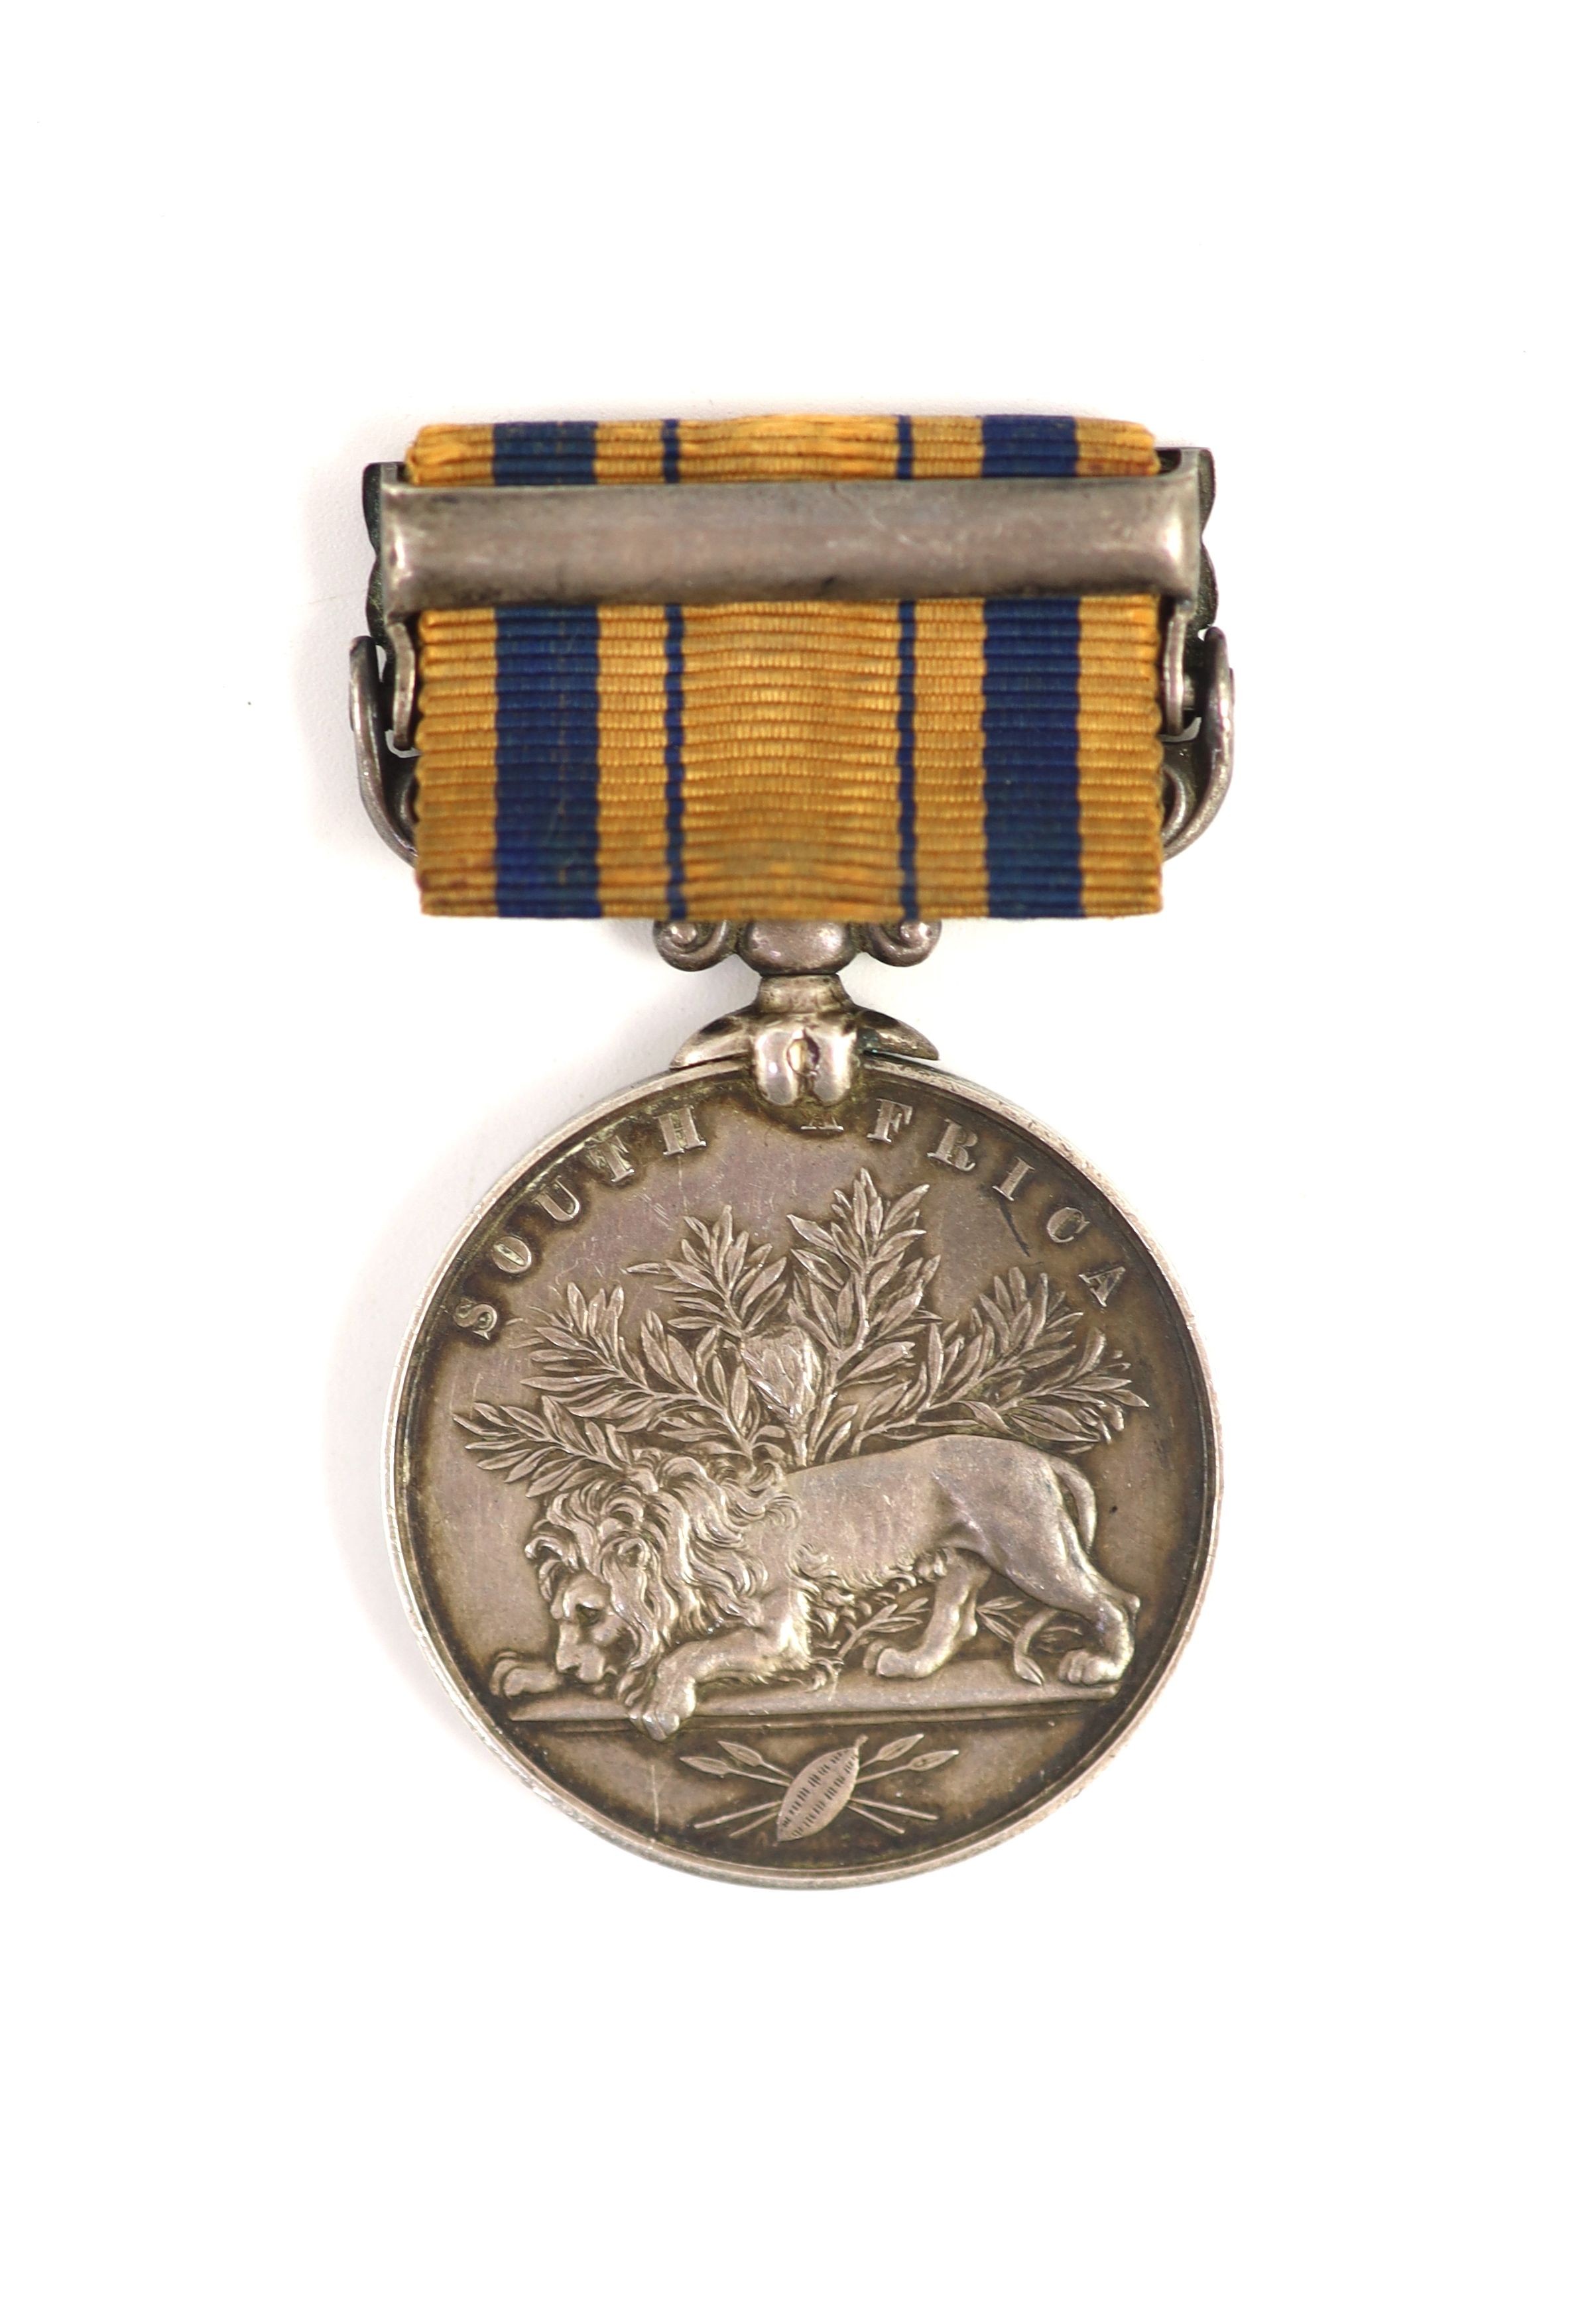 A South Africa medal with 1879 clasp to 1888 Bombr J. Borberer, 7th Brigade RA